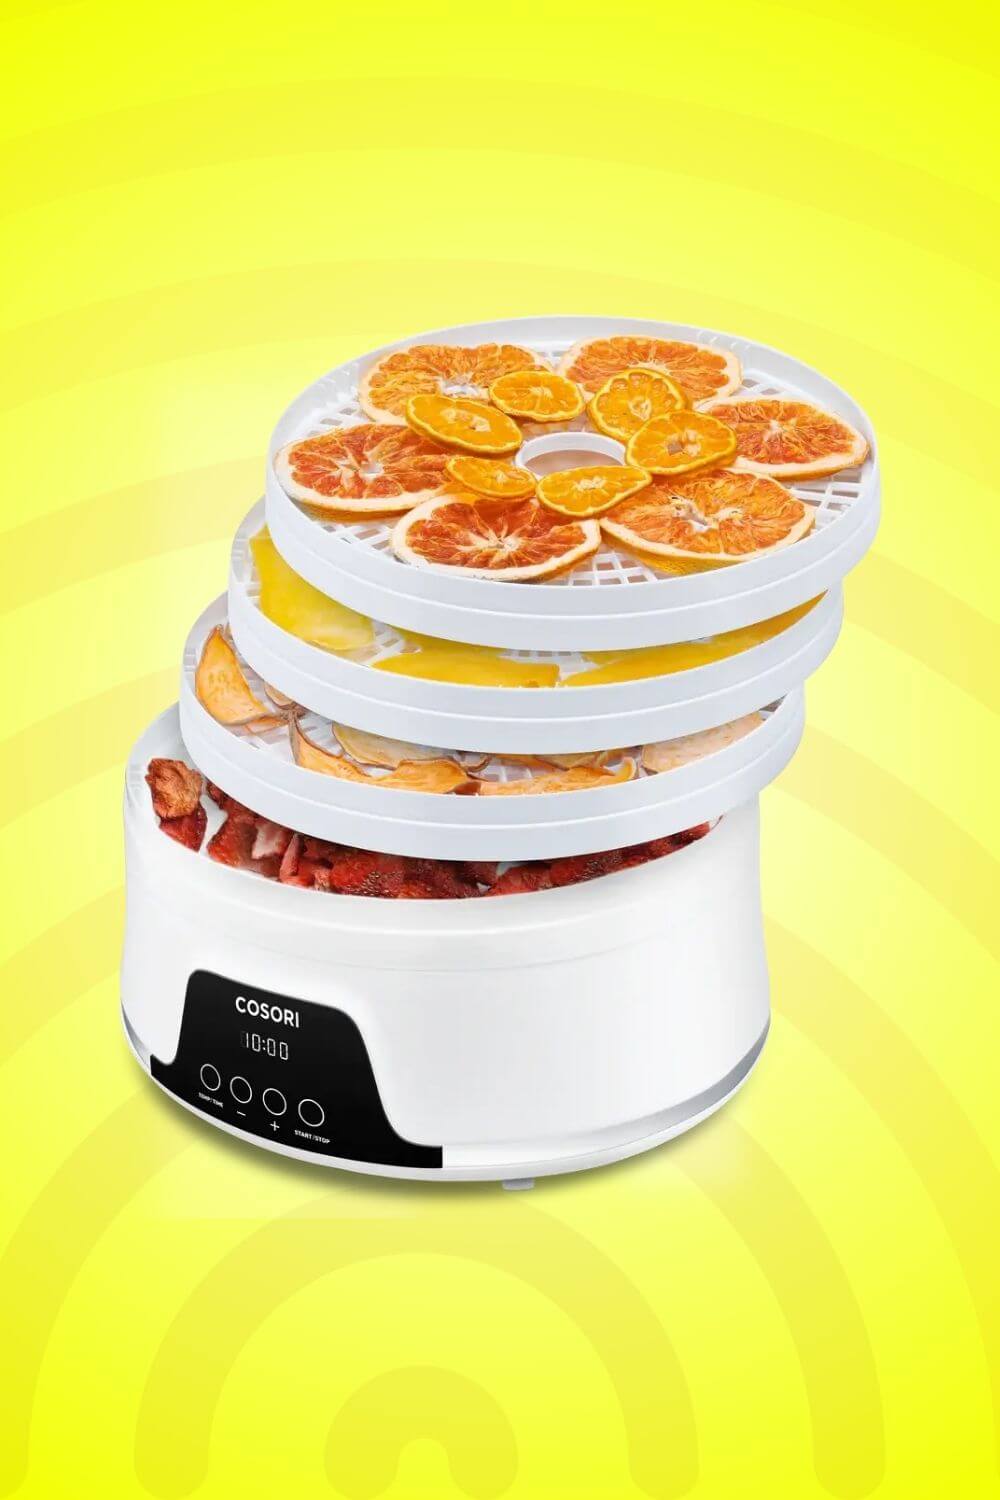 Cosori Food Dehydrator is the Secret to Making Jerky, Fruit Rolls, Spices & More